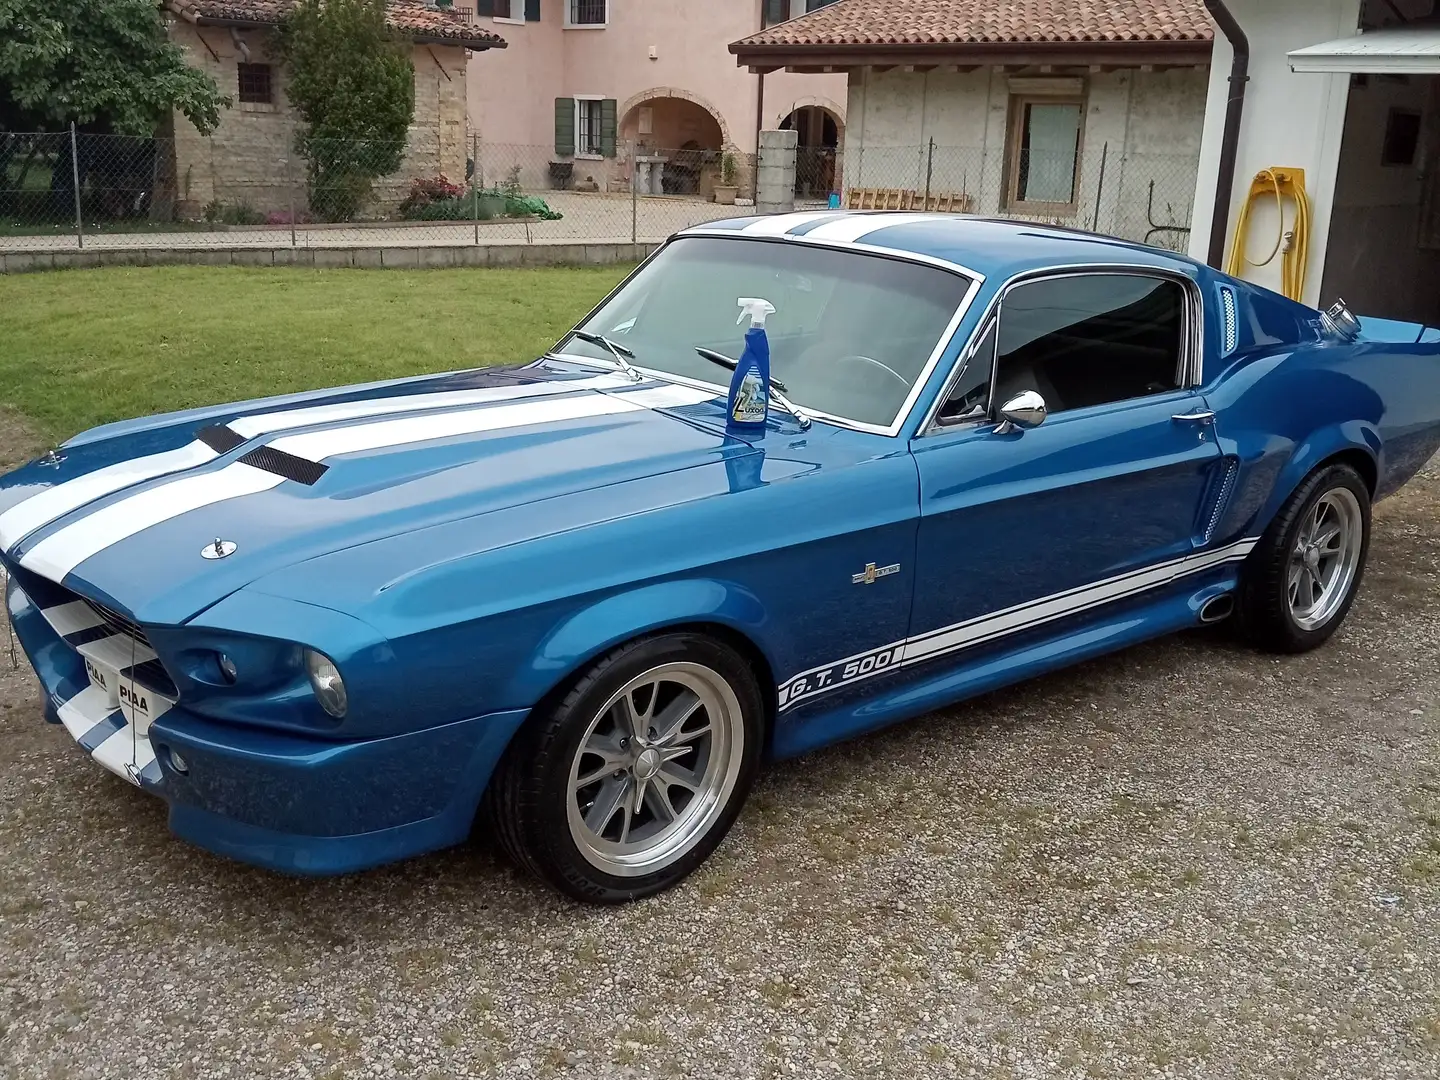 Ford Mustang Shelby GT 500 "Eleanor" plava - 1